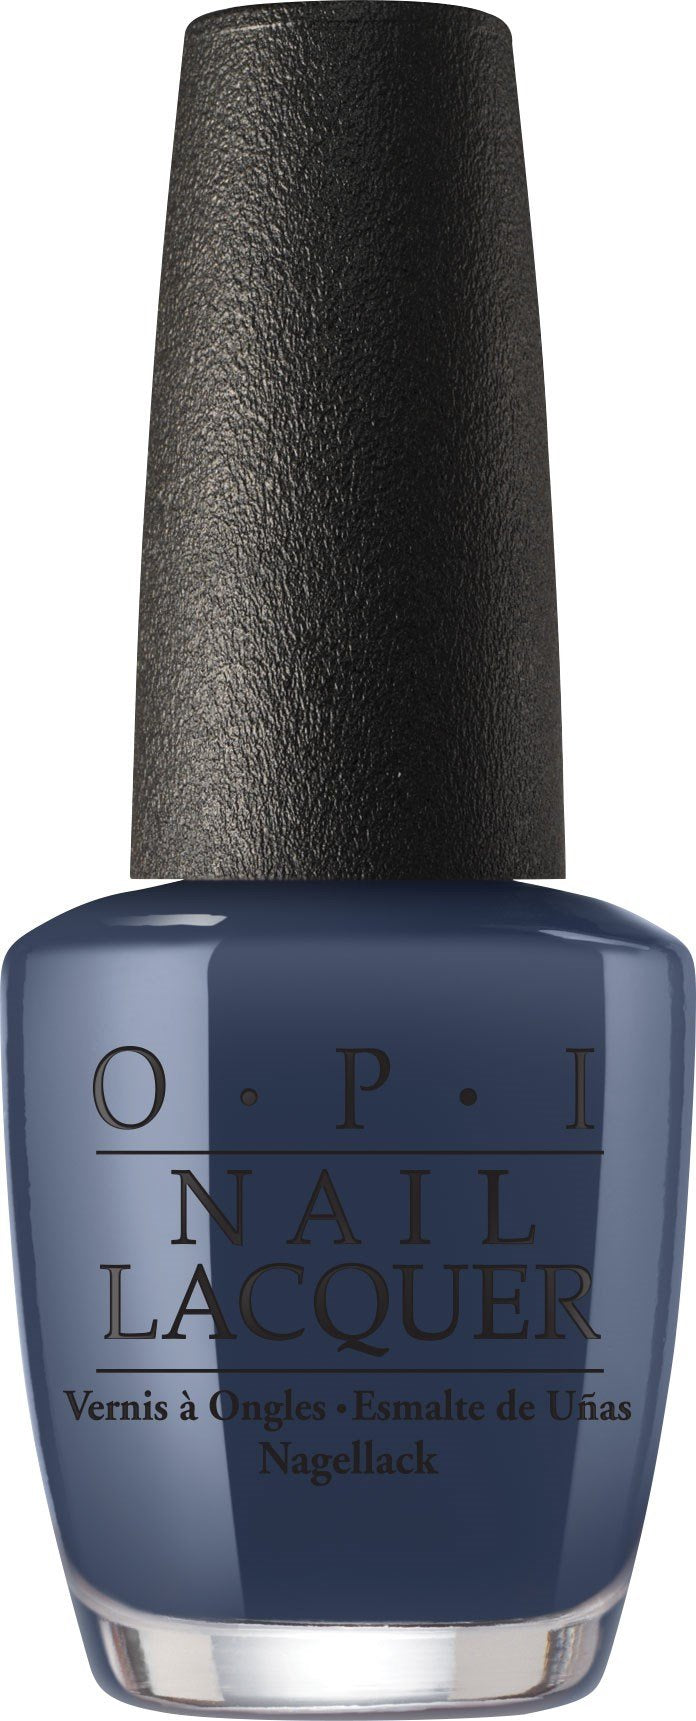 OPI Nail Lacquer - Less Is Norse - ICELAND